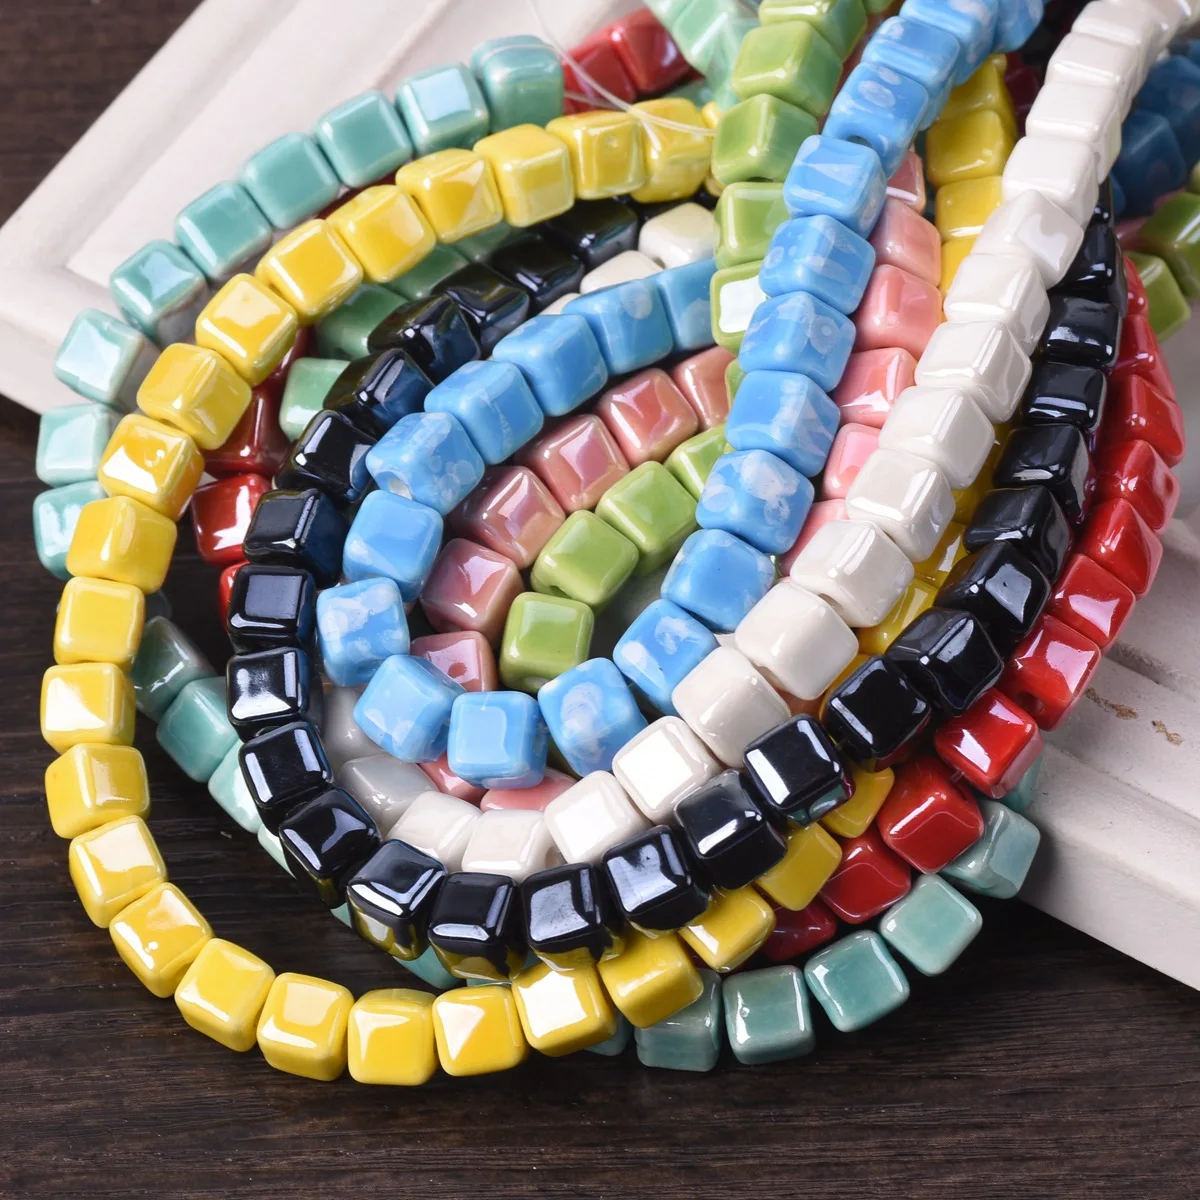 20pcs 6mm 8mm 10mm Cube Shape Shiny Glazed Ceramic Porcelain Loose Beads Lot For Jewelry Making DIY Crafts 5pcs fish shape hand painted ceramic beads for jewelry making loose spacer ceramic beads necklace diy handmade accessories